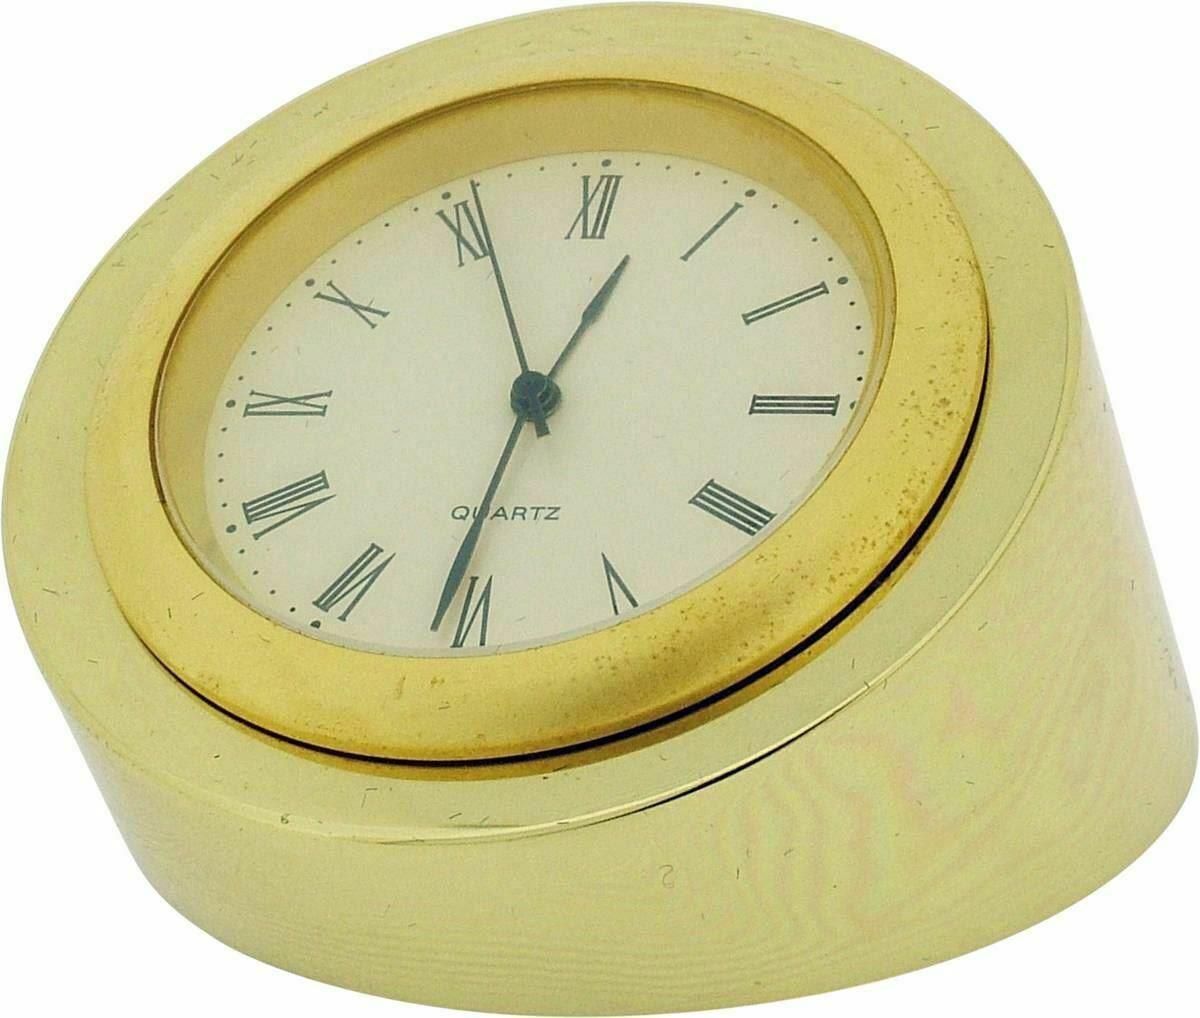 Miniature Clock Goldtone Metal Small Round Desk Clock Solid Brass IMP55 - CLEARANCE NEEDS RE-BATTERY